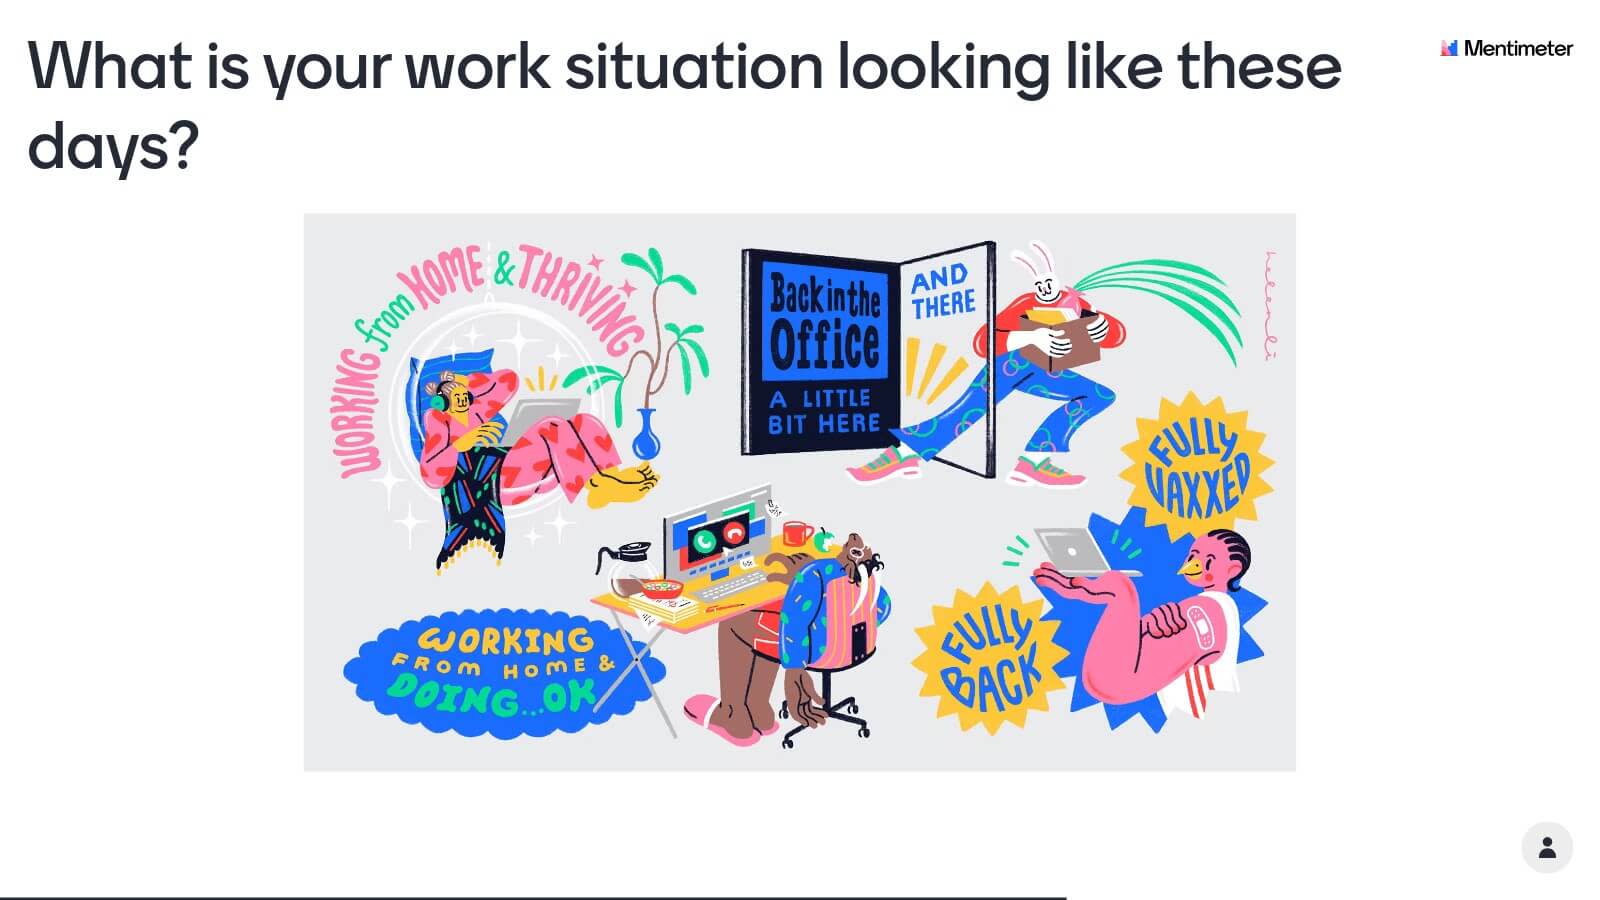 What is your work situation looking like these days?